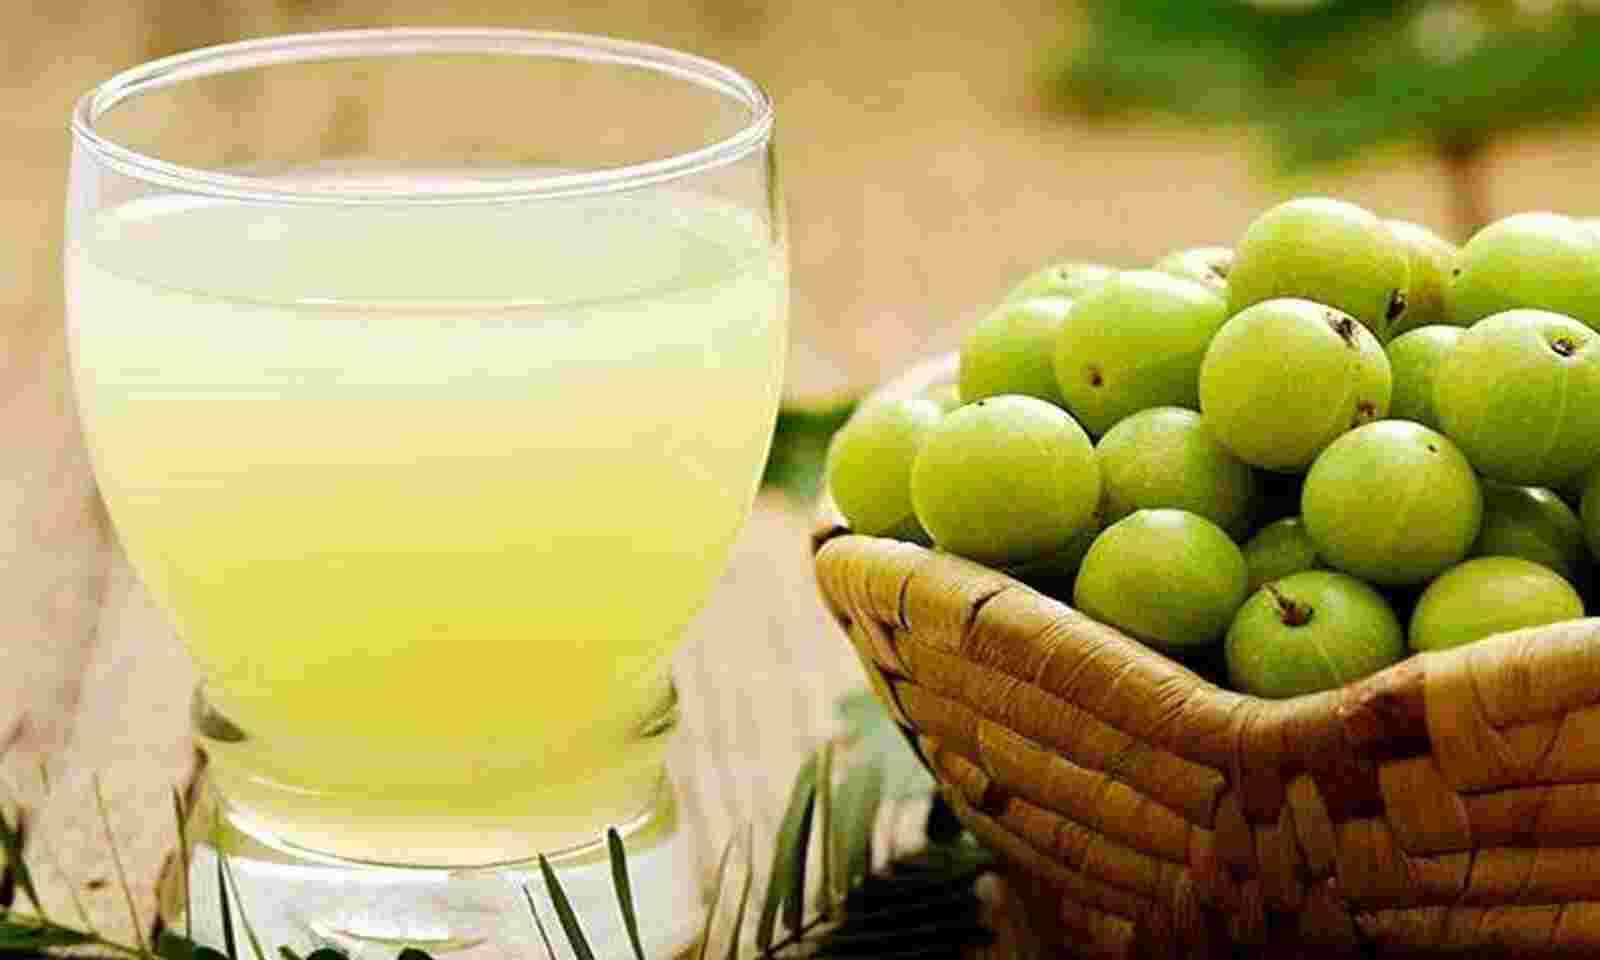 Hair Care at Home: Know about the benefits of Amla & Ways to use it